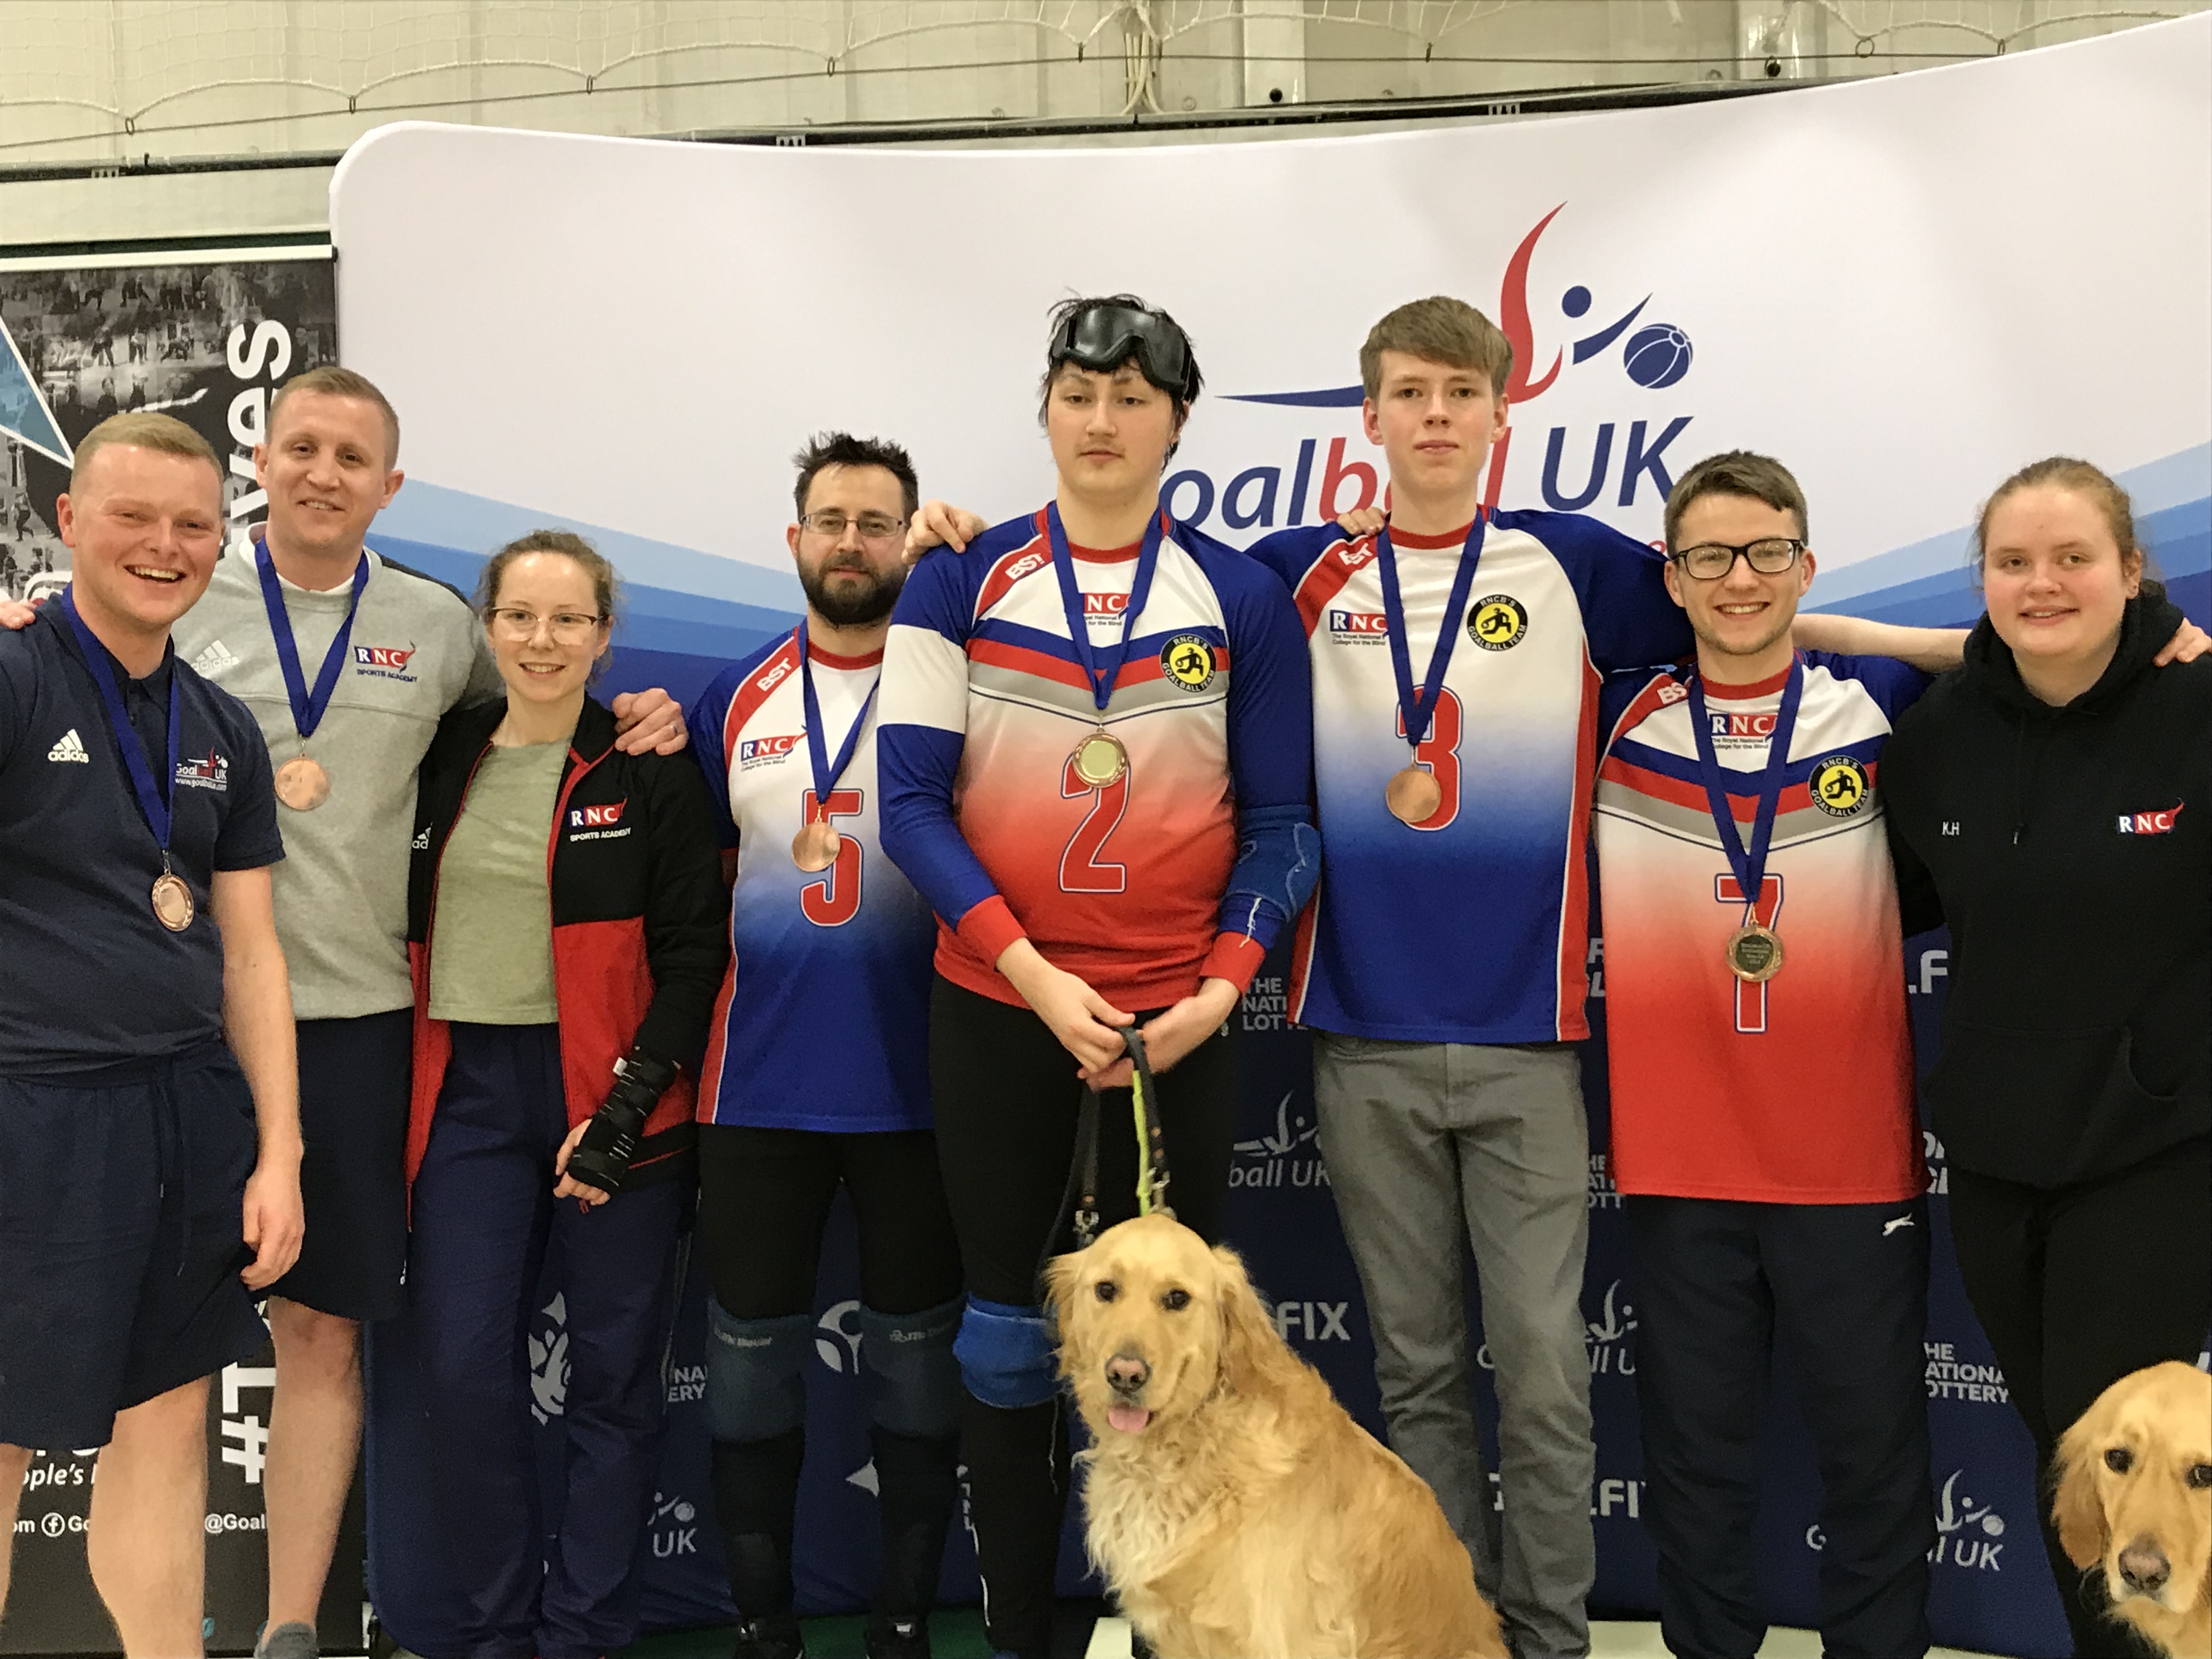 Photo of RNC sporting their medals at the end of the Goalfix Goalball Cup 2019